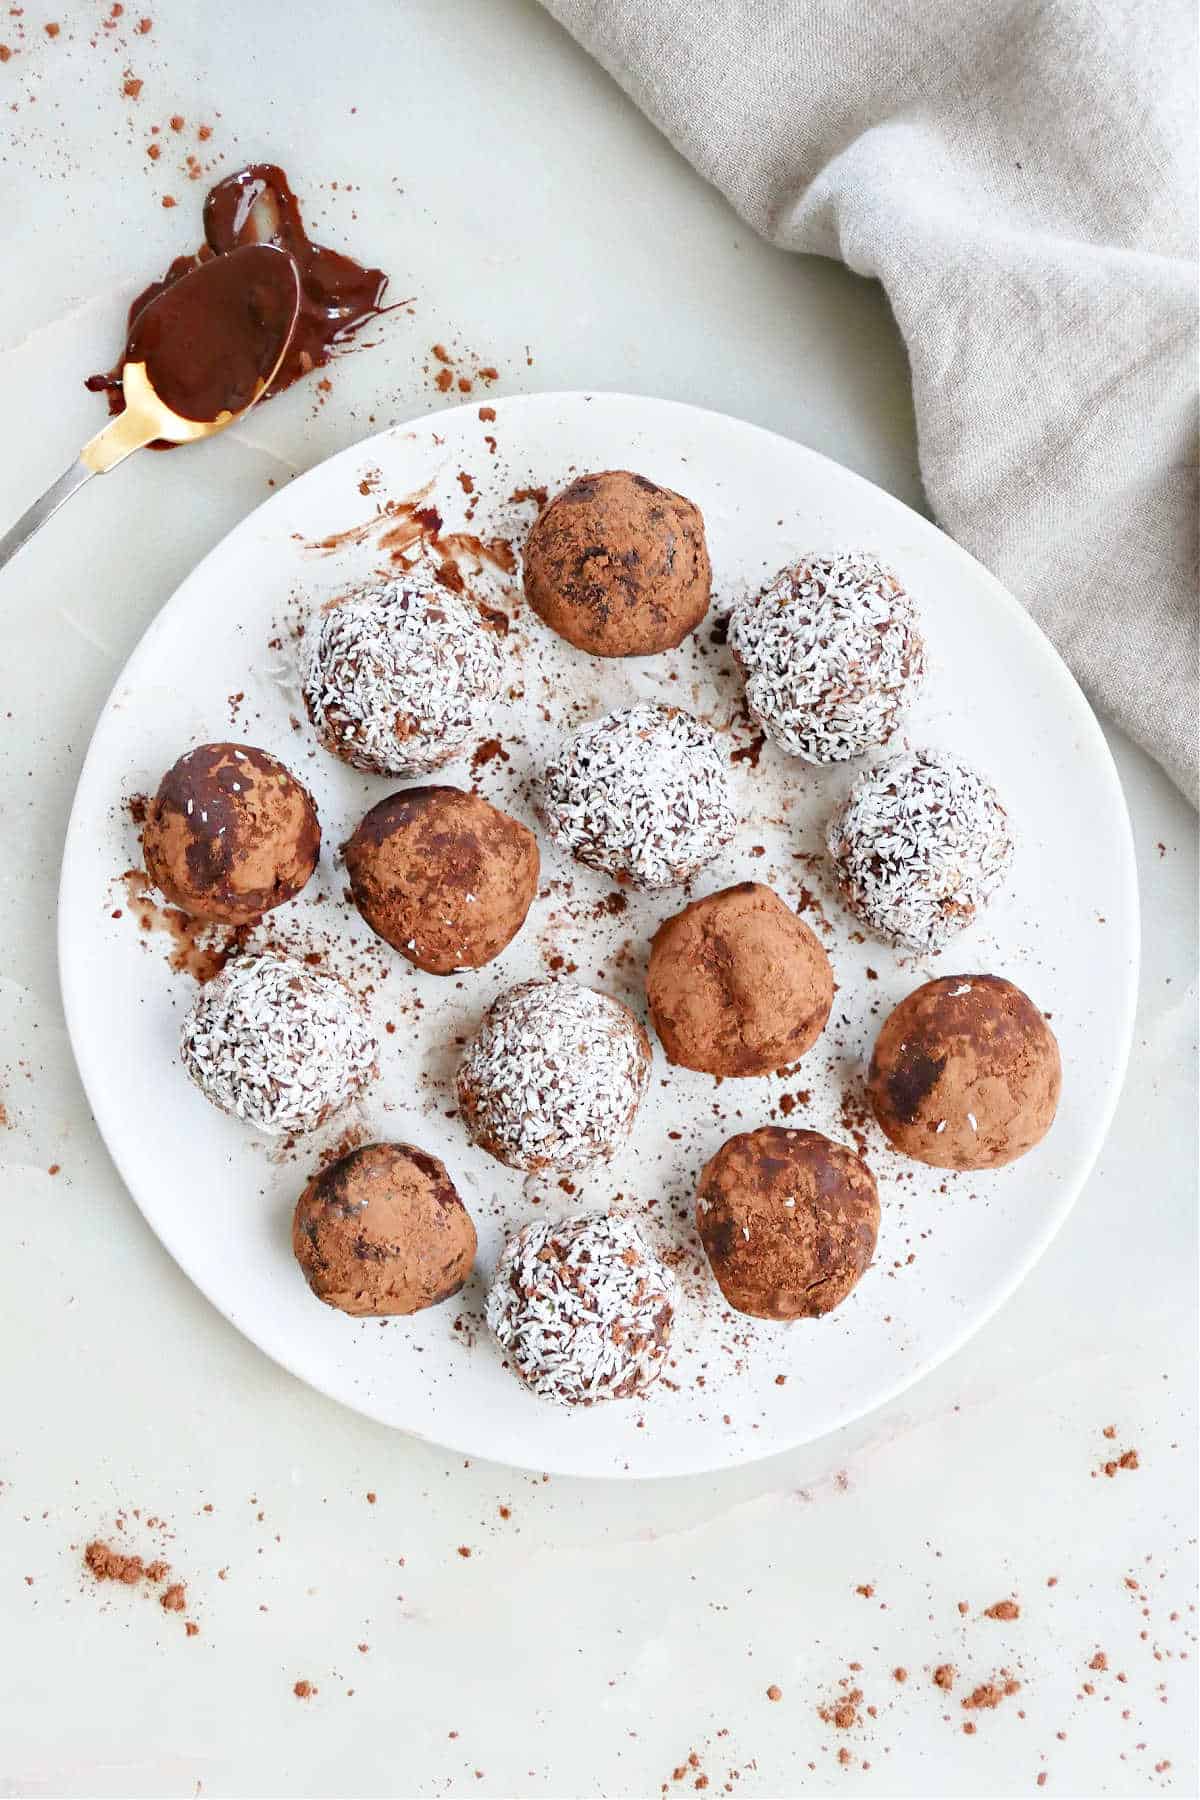 14 avocado truffles dusted with cocoa powder or coconut on a plate